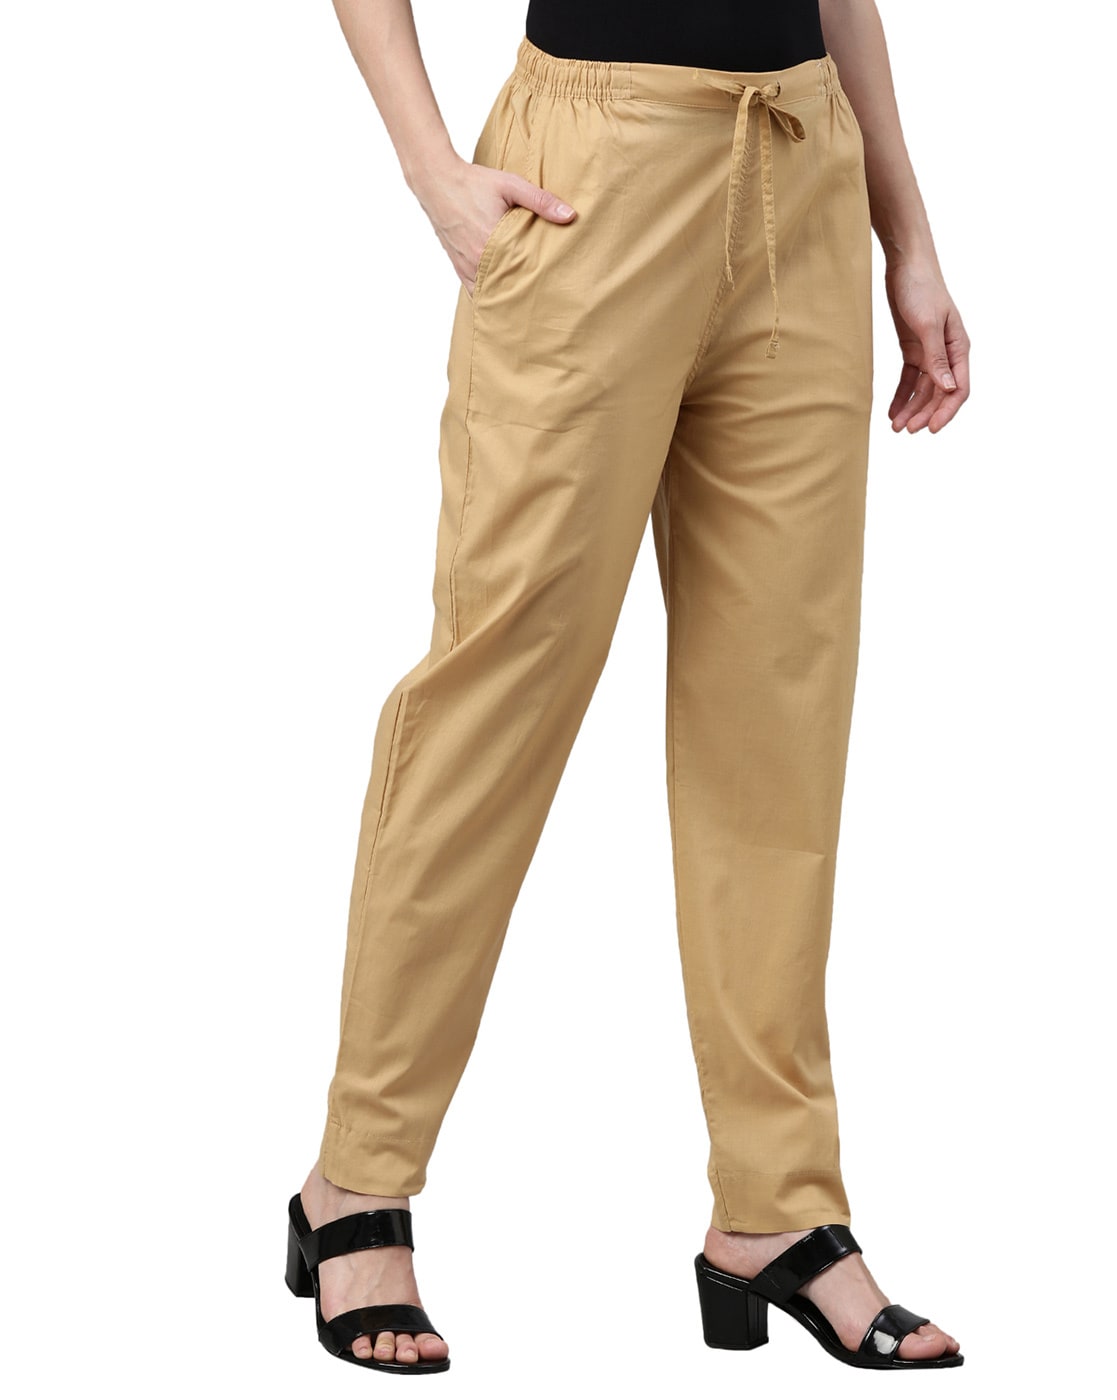 Buy Brown Trousers & Pants for Women by Fig Online | Ajio.com